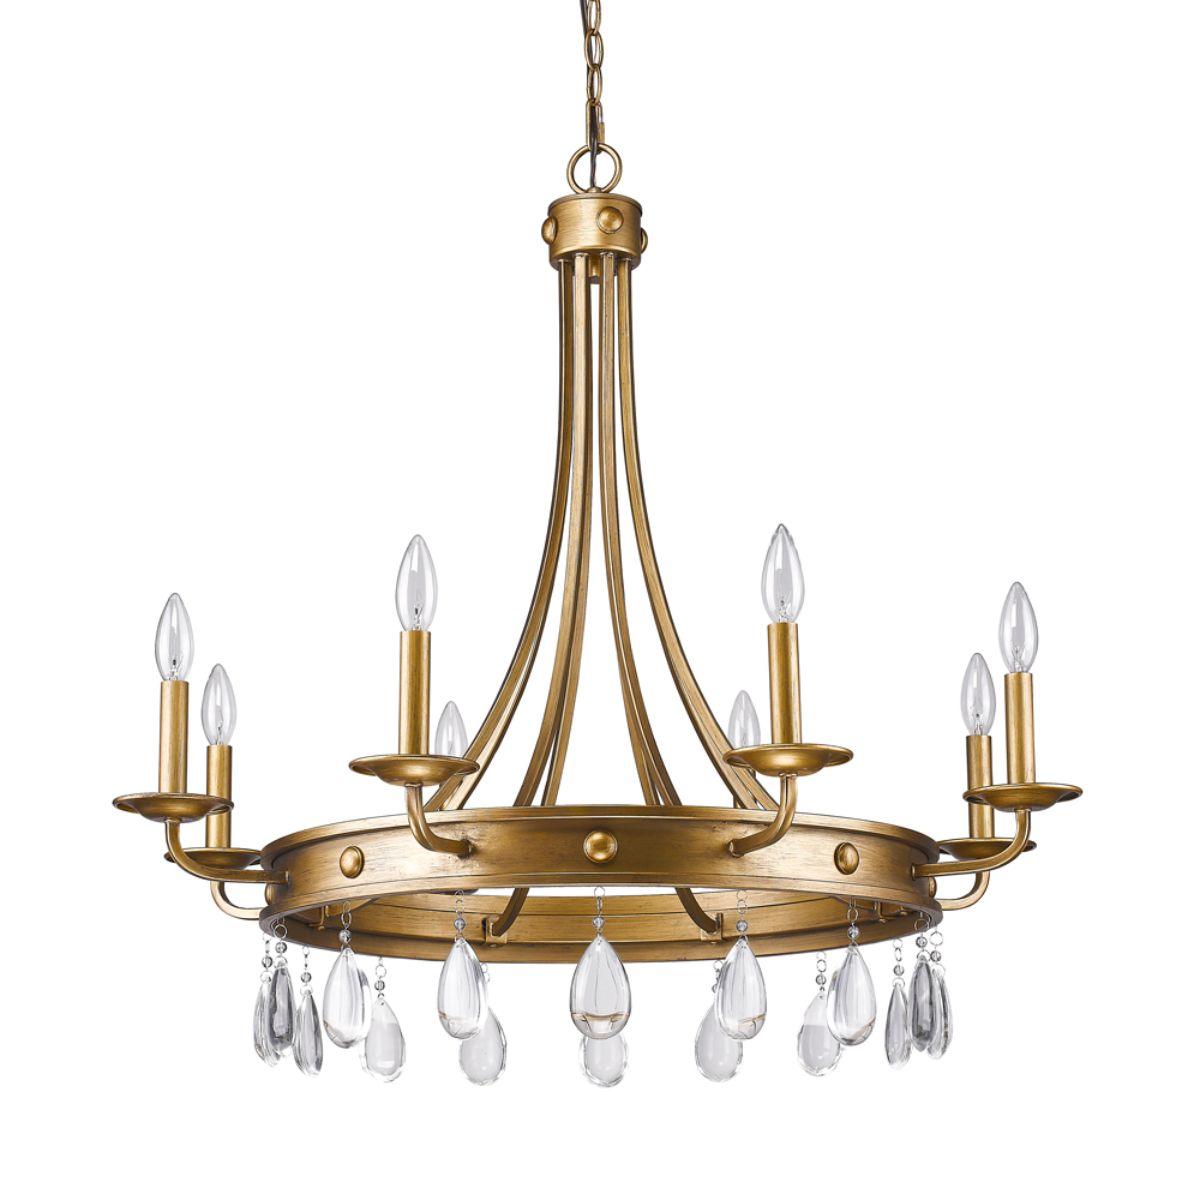 Krista 32 in. 8 Lights Chandelier with Crystal Accents and Studded Antique Gold Bands